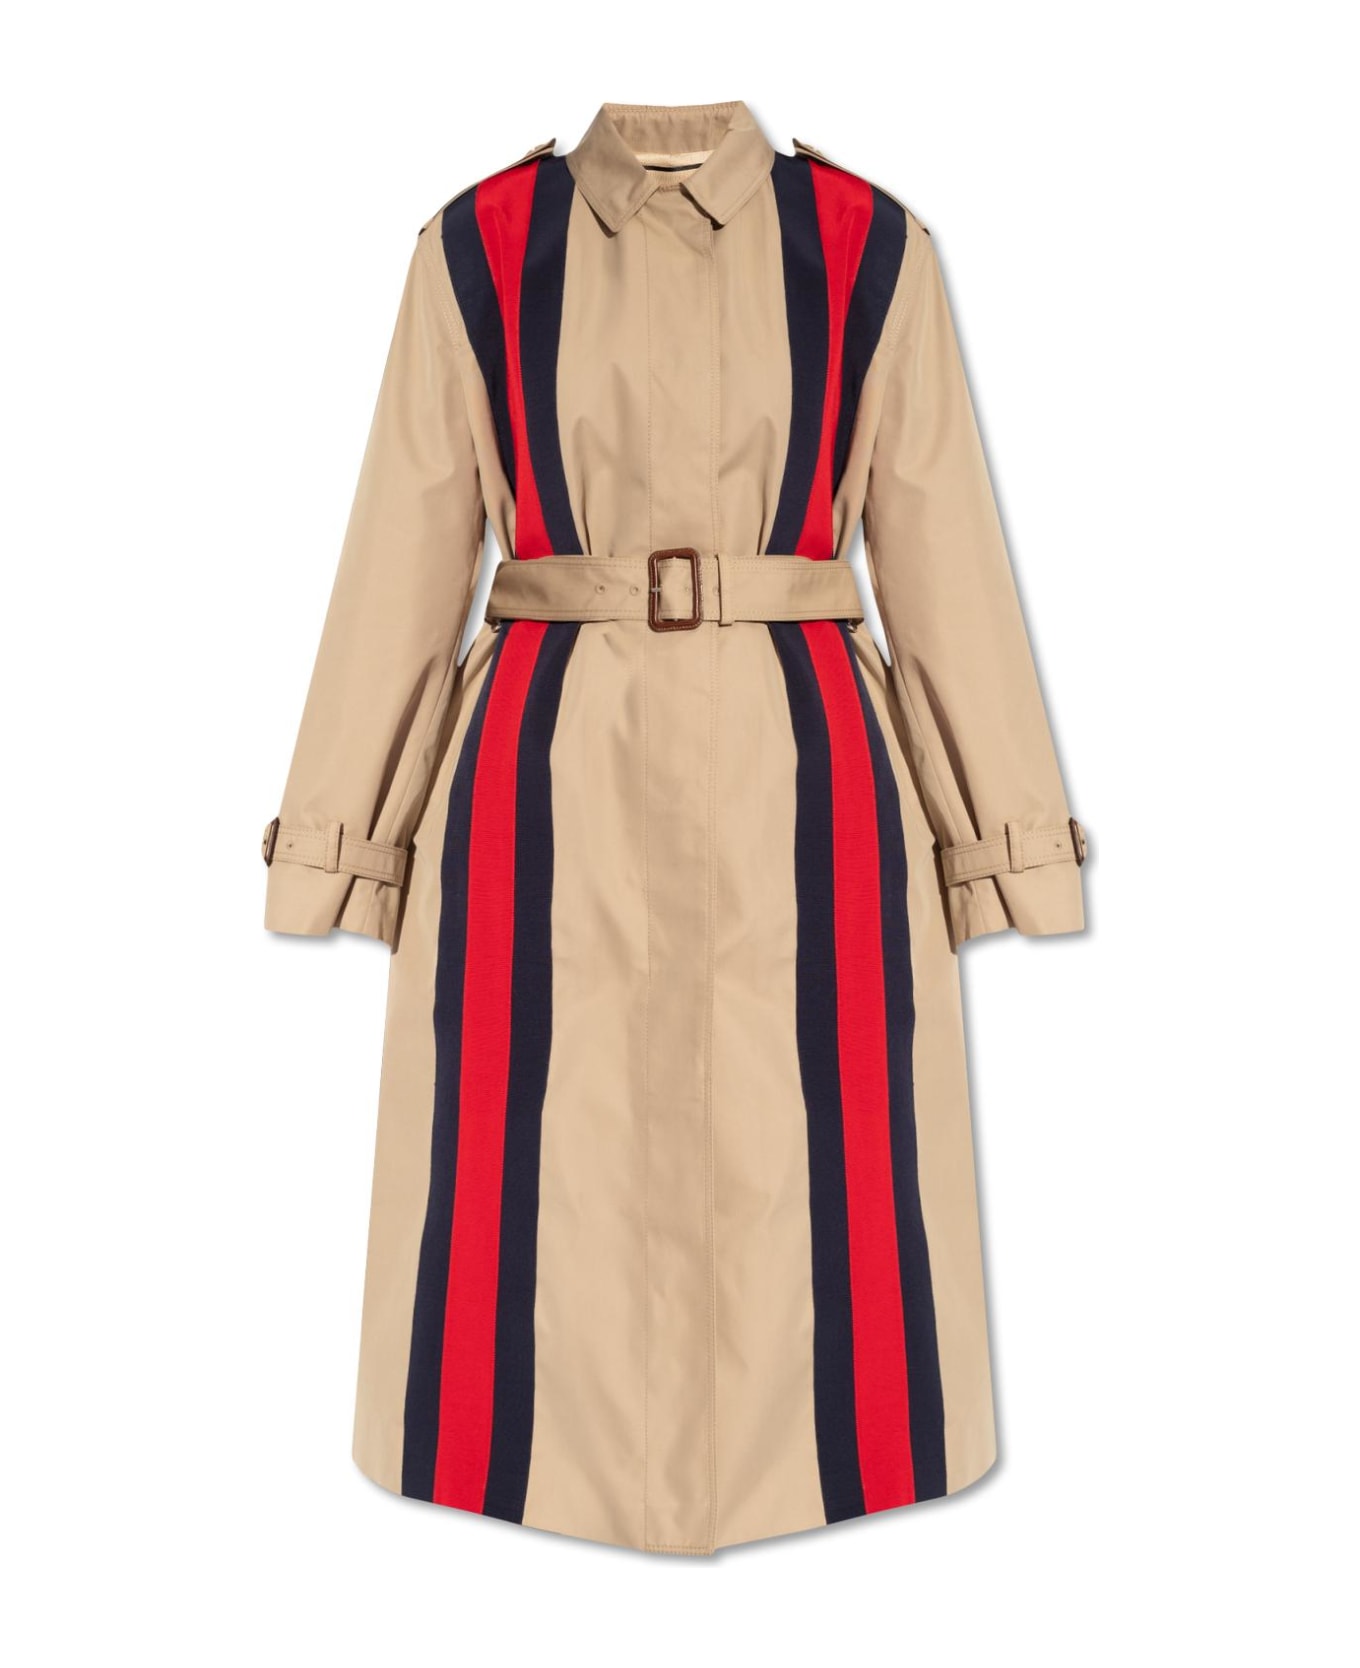 Gucci Coat With Web Stripe - Camel